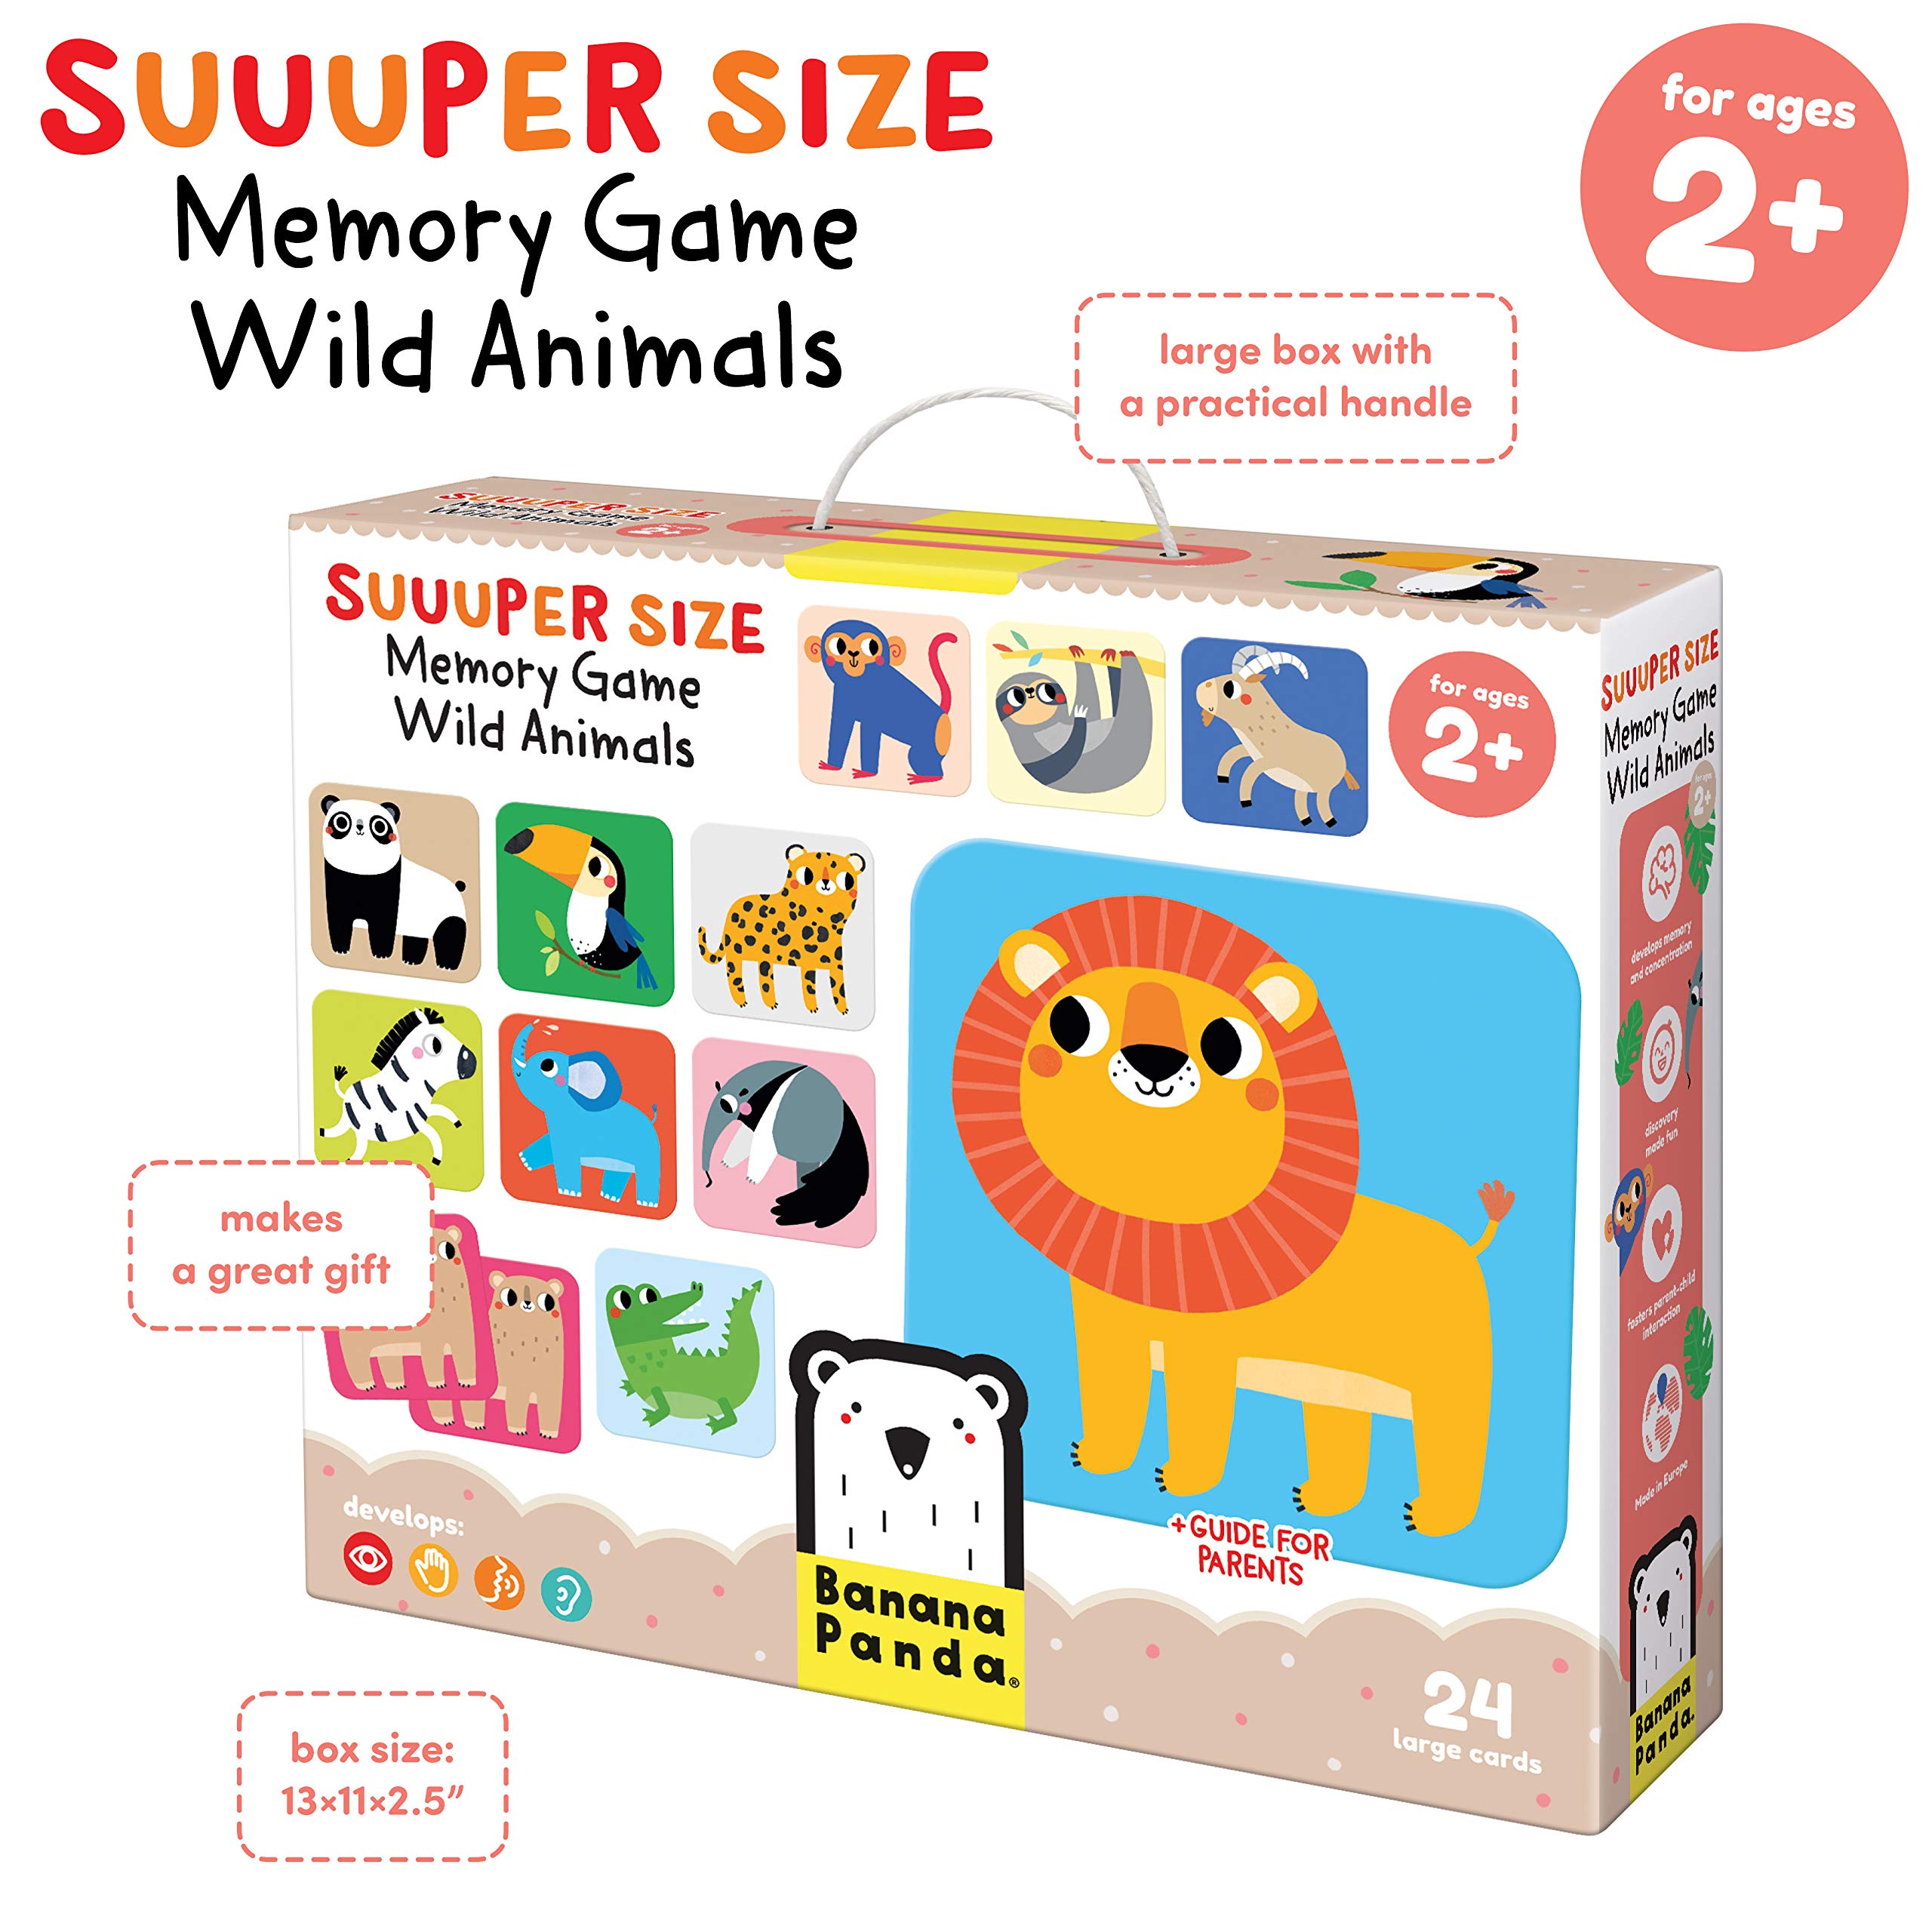 Banana Panda - Suuuper Size Memory Game Wild Animals - Educational Matching Activity for Kids Ages 2 Years +